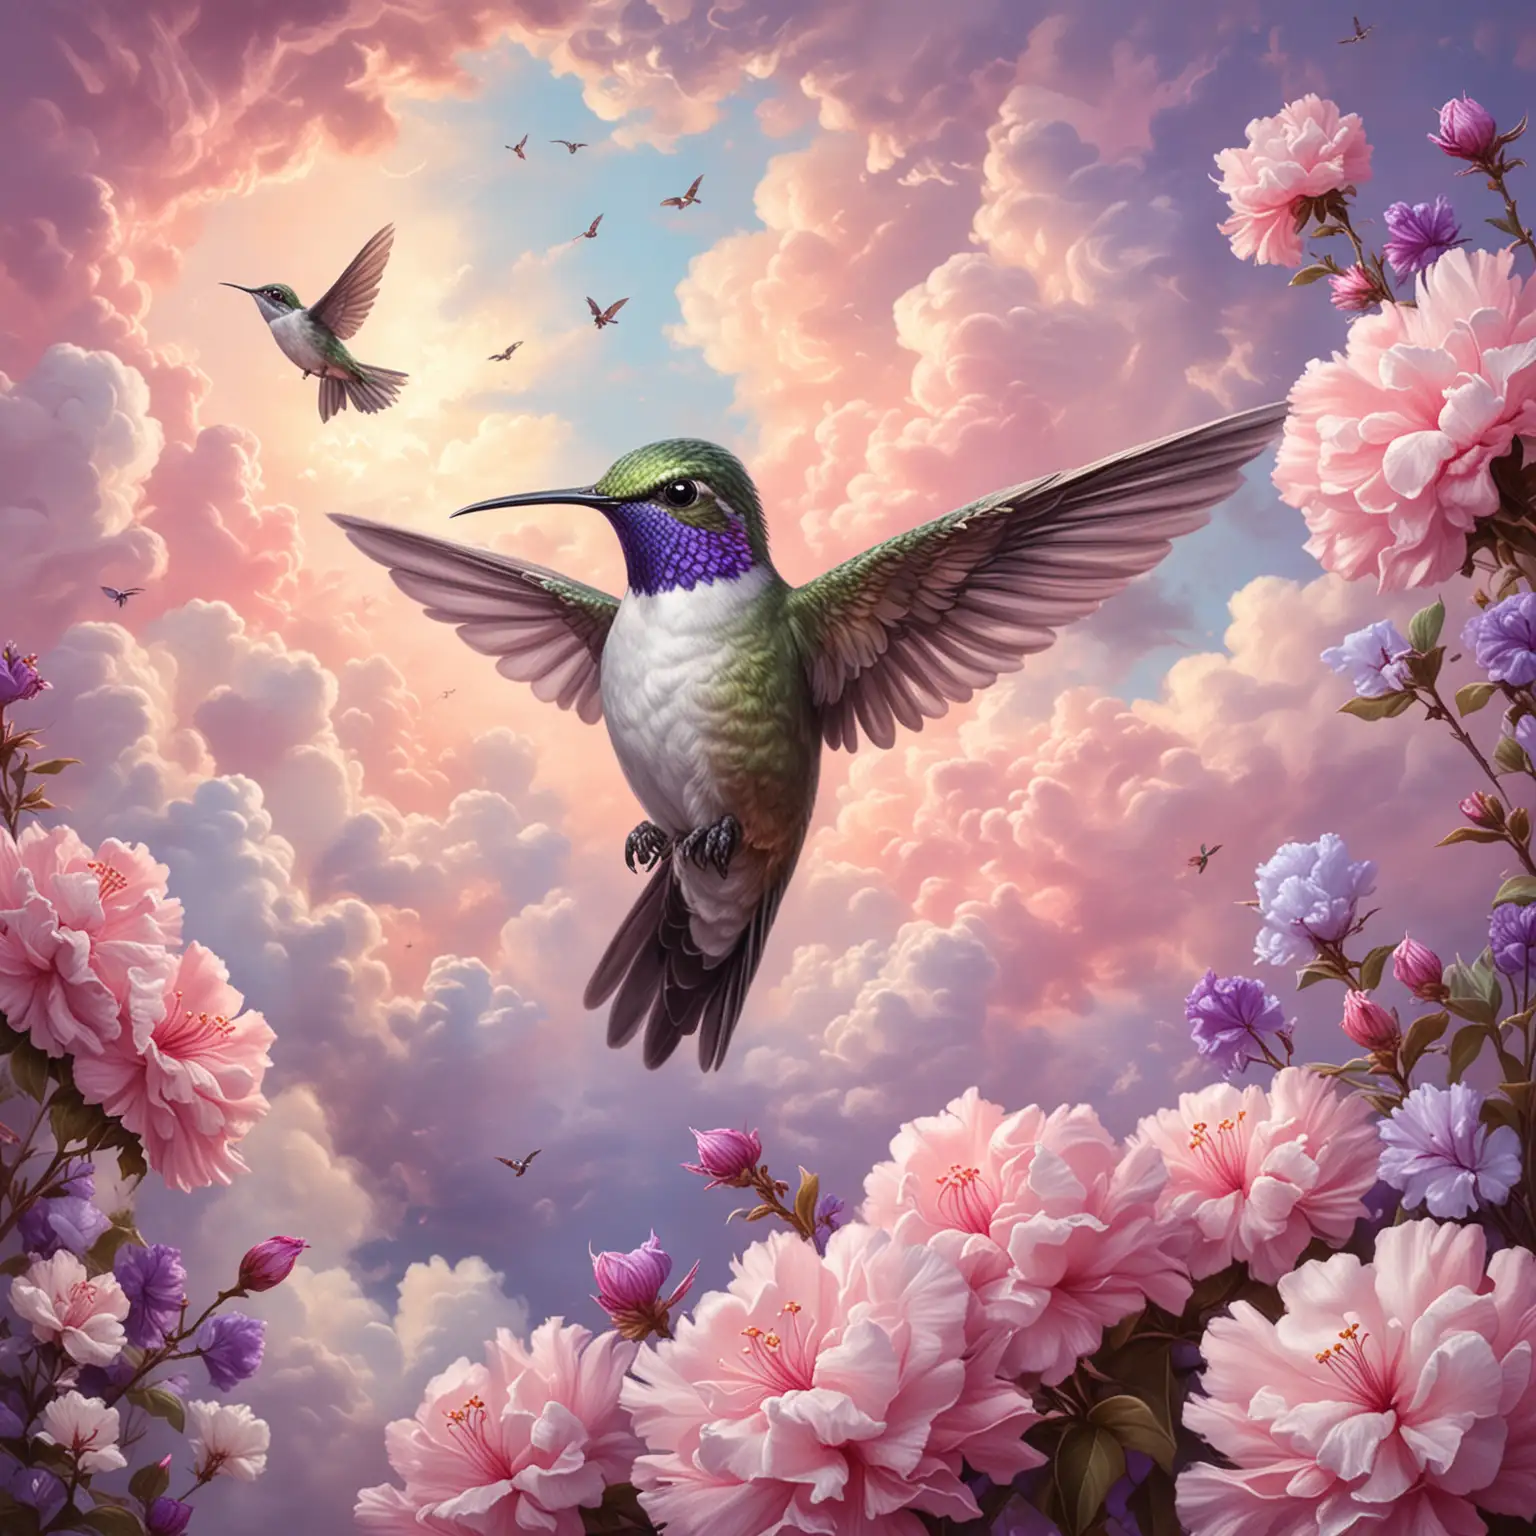 Graceful Hummingbird Amidst Cotton Candy Flowers in Pastel Pink and Purple